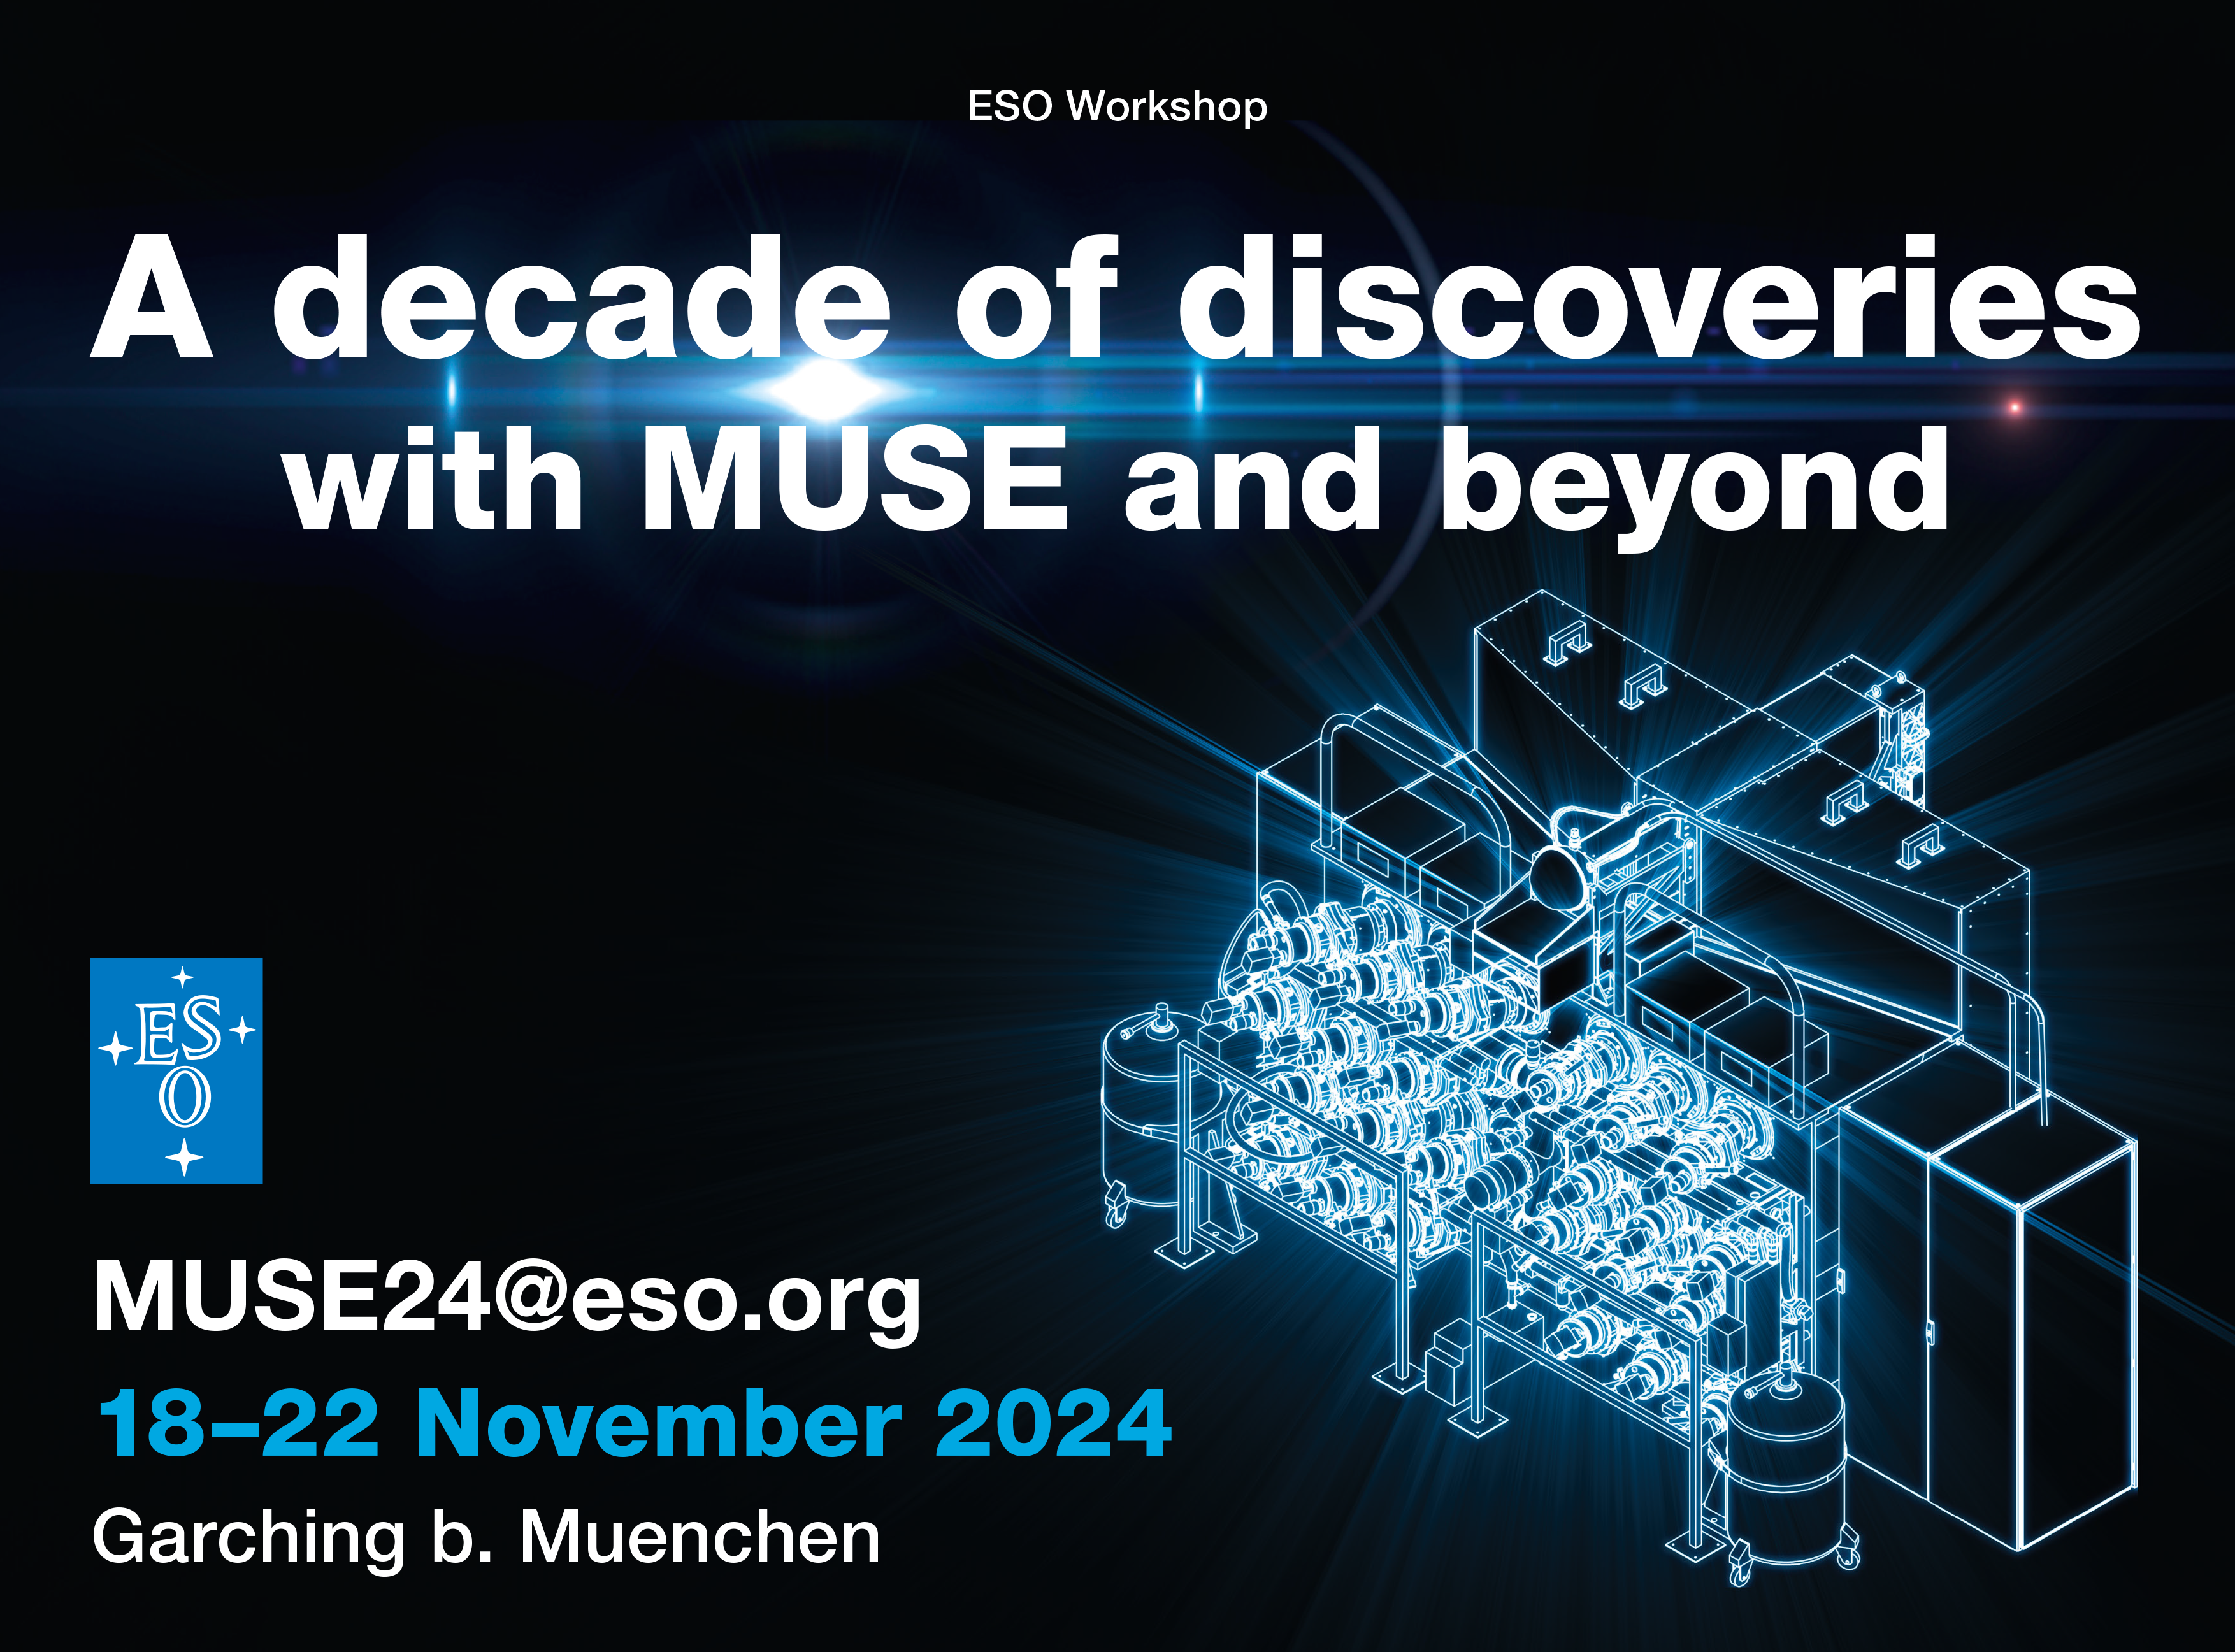 A decade of discoveries with MUSE and beyond